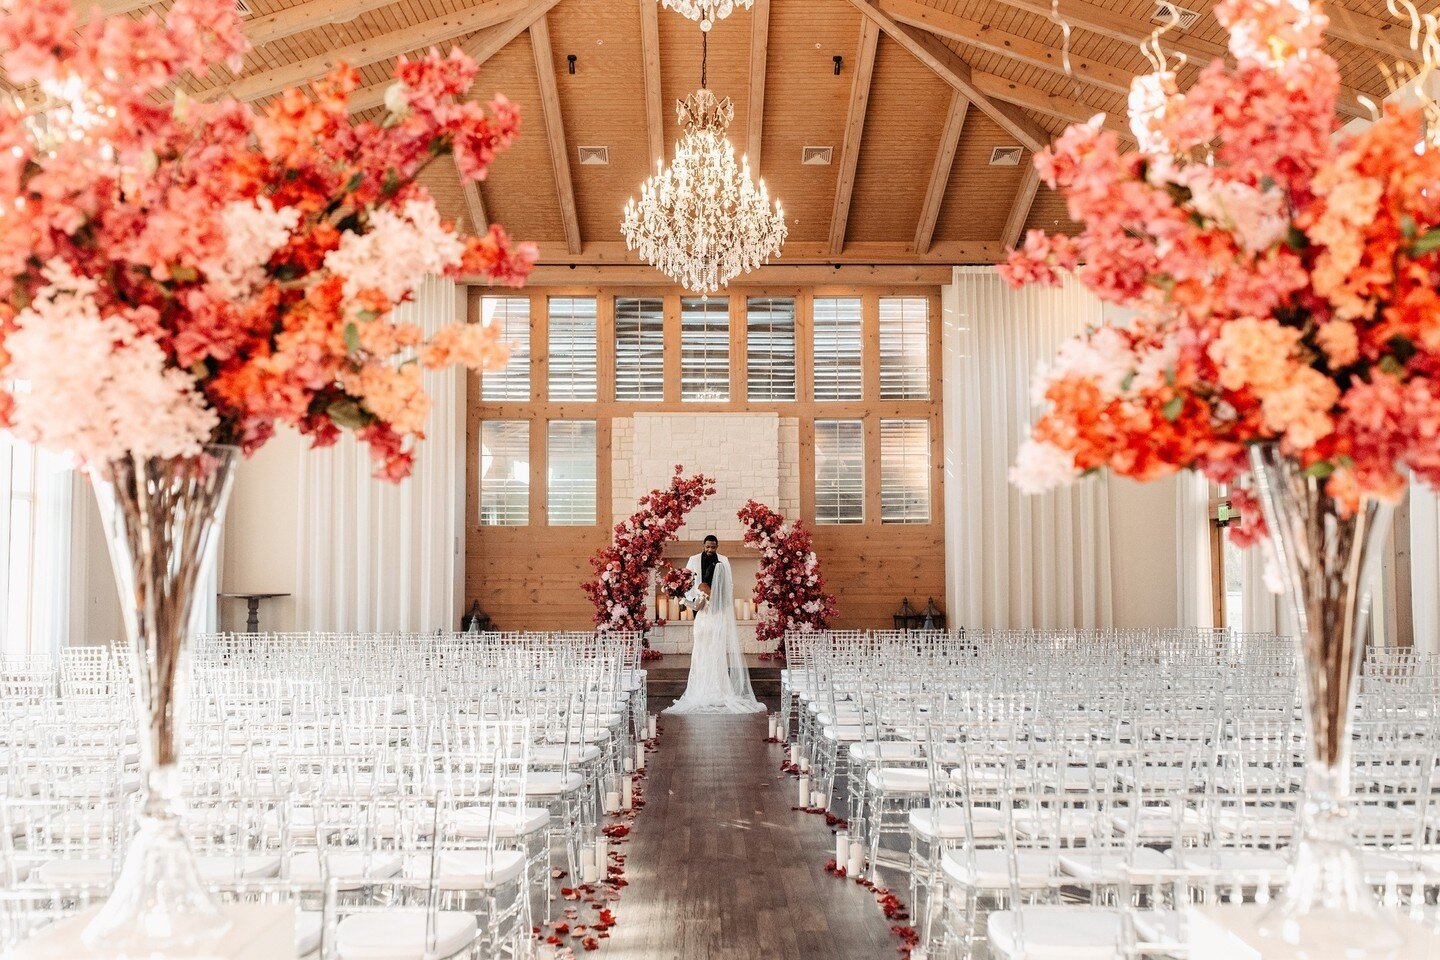 Opting for our permanent florals on your wedding day offers practical advantages. ⁠
⁠
Enjoy the lasting beauty without concerns of wilting, making them a low-maintenance choice. Faux florals are also budget-friendly, hypoallergenic, and environmental